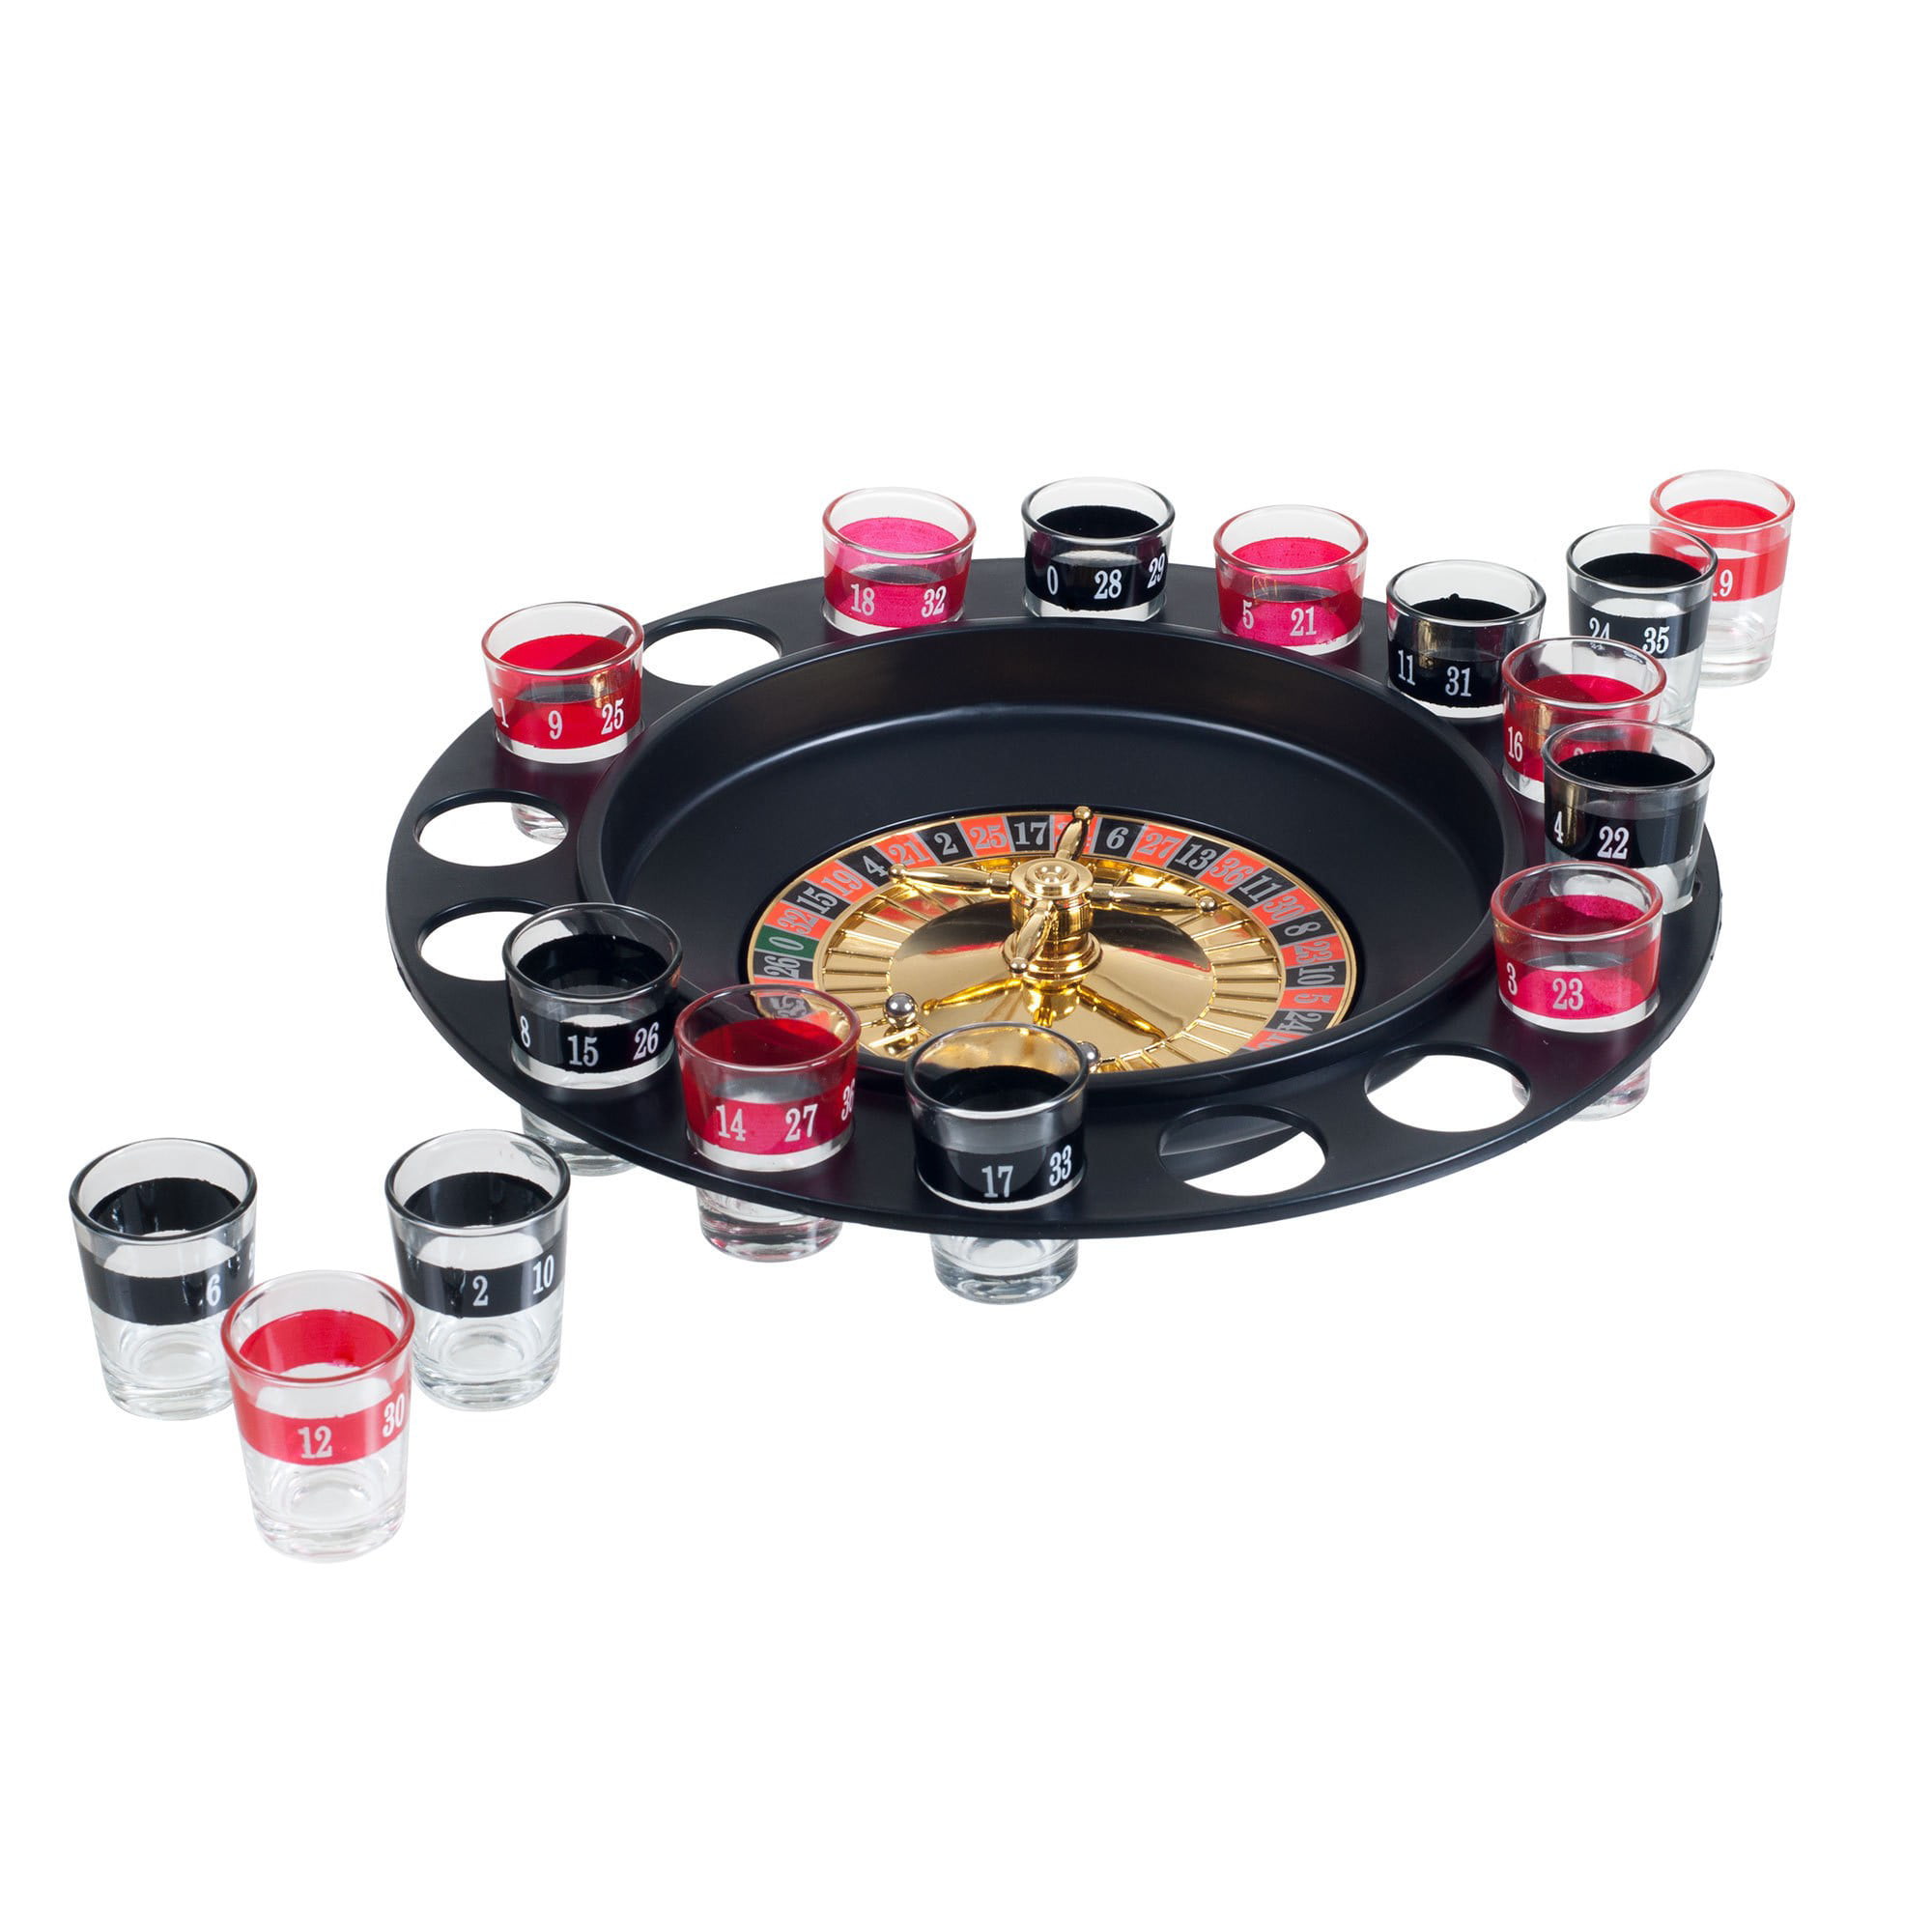 ROULETTE WHEEL DRINKING GAME party supplies fun adult games casino shot glass